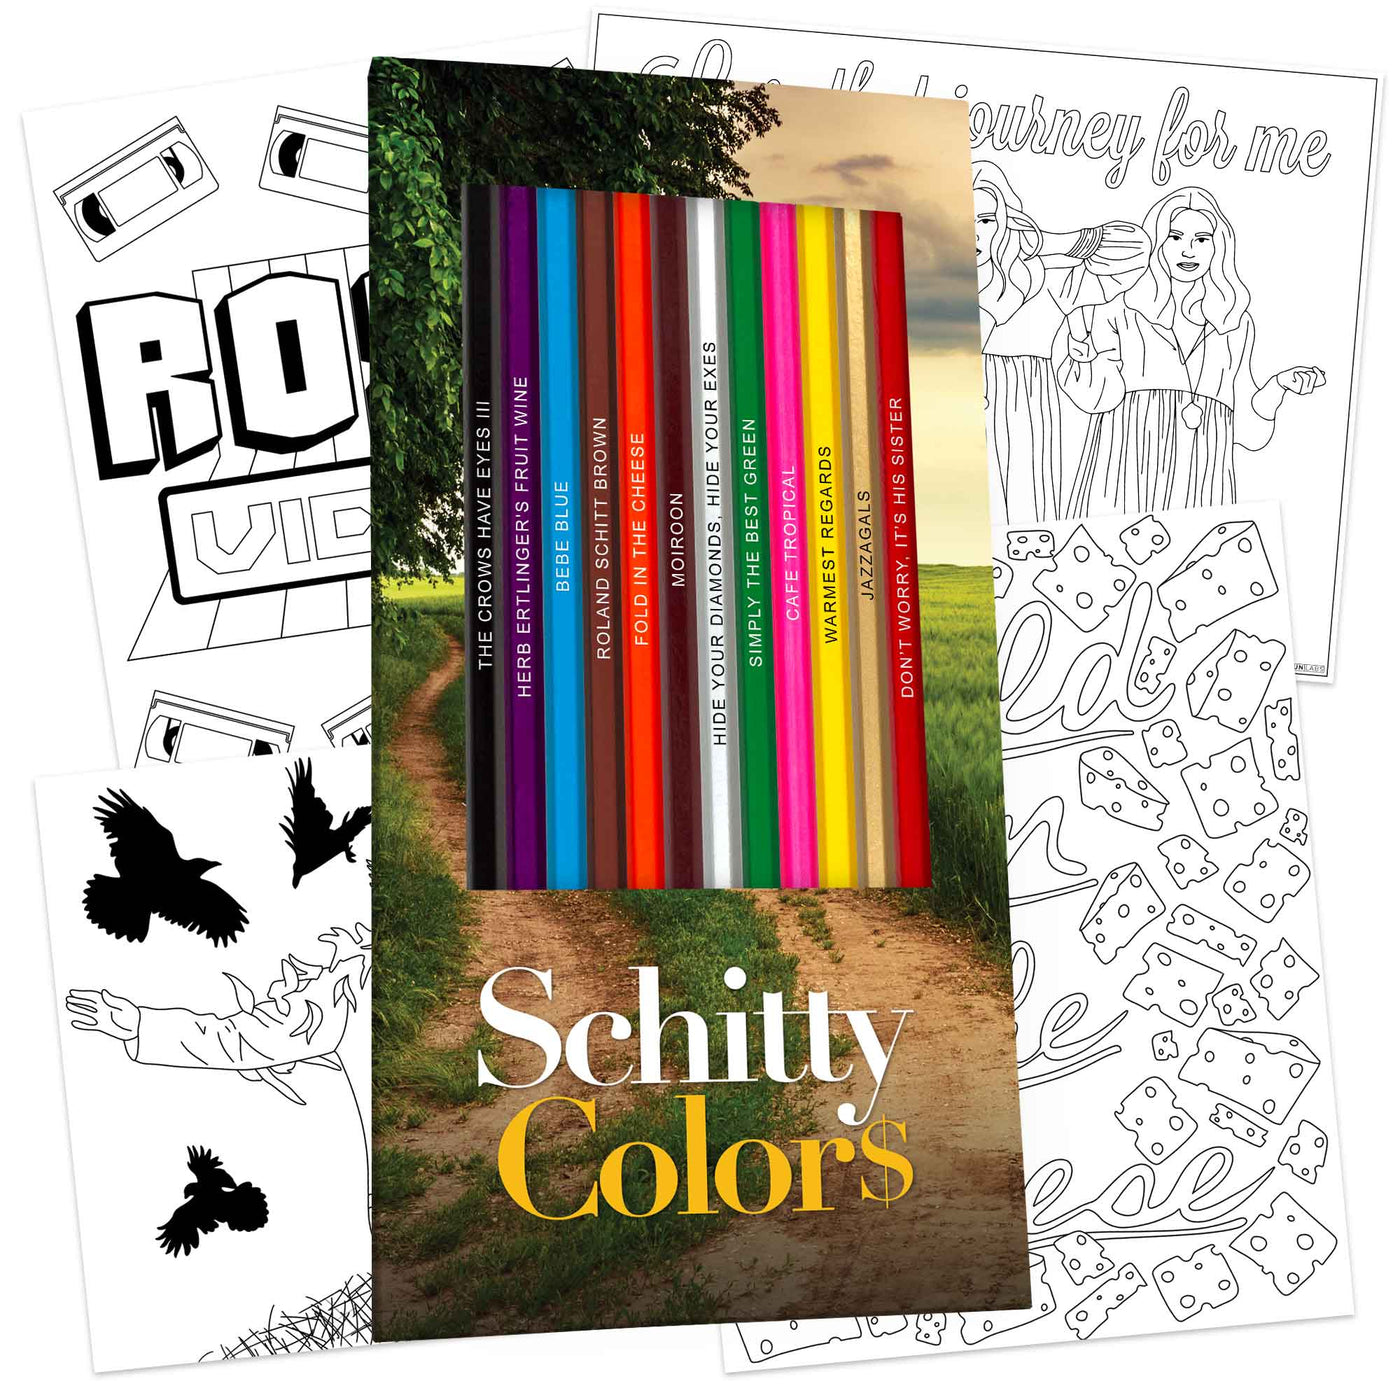 Schitty Colors display box and colored pencils, four coloring pages with Schitt's Creek inspired theme